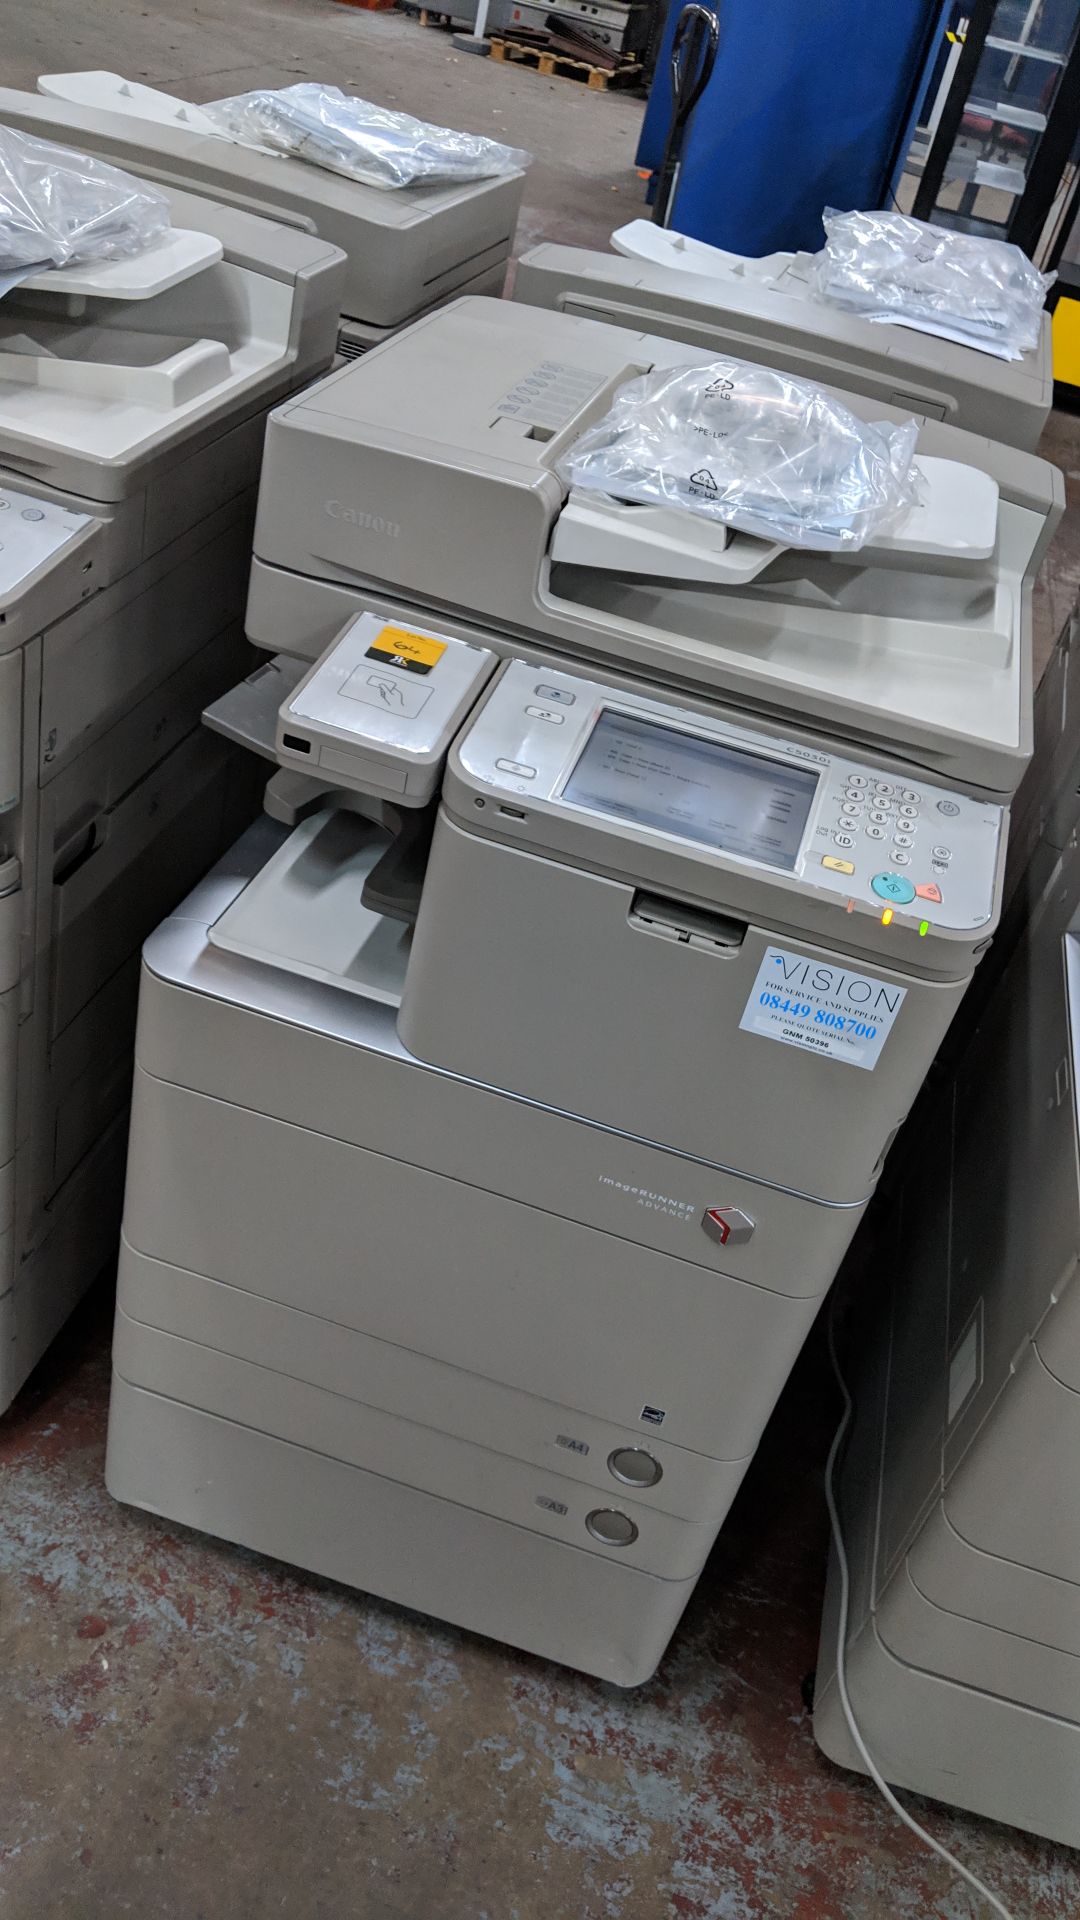 Canon imageRUNNER Advance model C5030i floorstanding copier with auto docufeed & pedestal